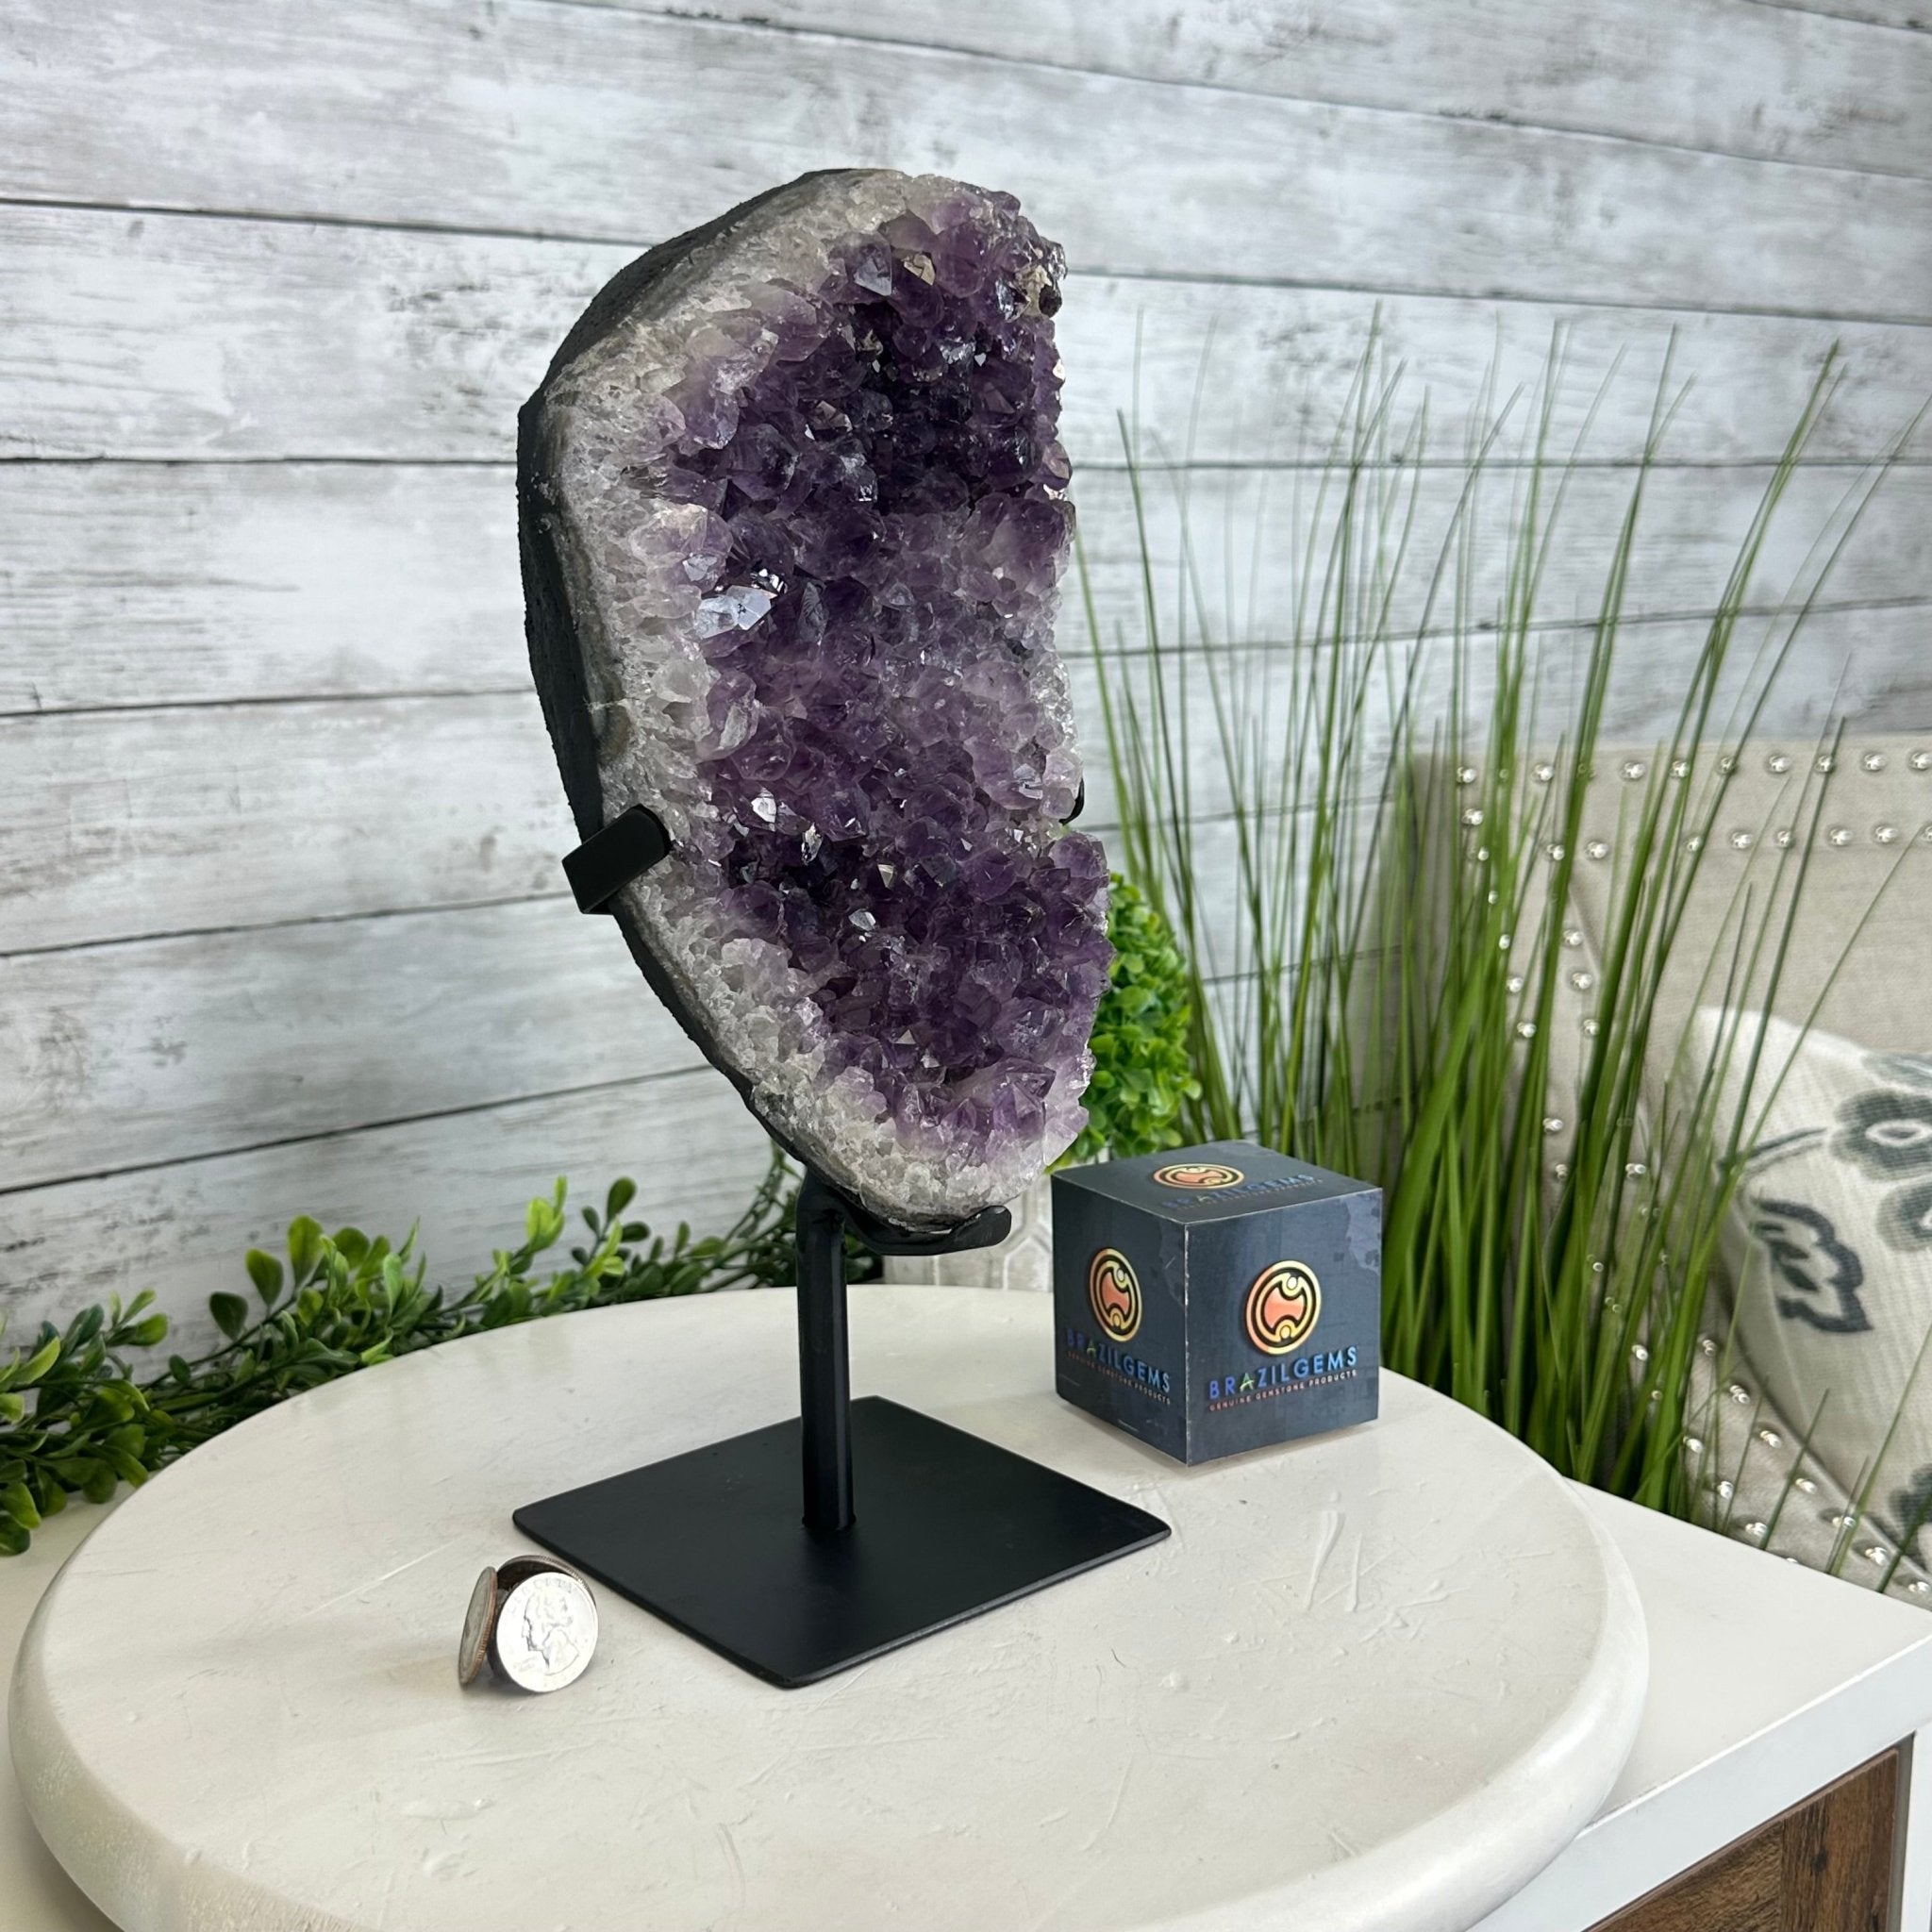 Quality Amethyst Cluster on a Metal Base, 9.3 lbs & 12.5" Tall #5491 - 0051 - Brazil GemsBrazil GemsQuality Amethyst Cluster on a Metal Base, 9.3 lbs & 12.5" Tall #5491 - 0051Clusters on Fixed Bases5491 - 0051